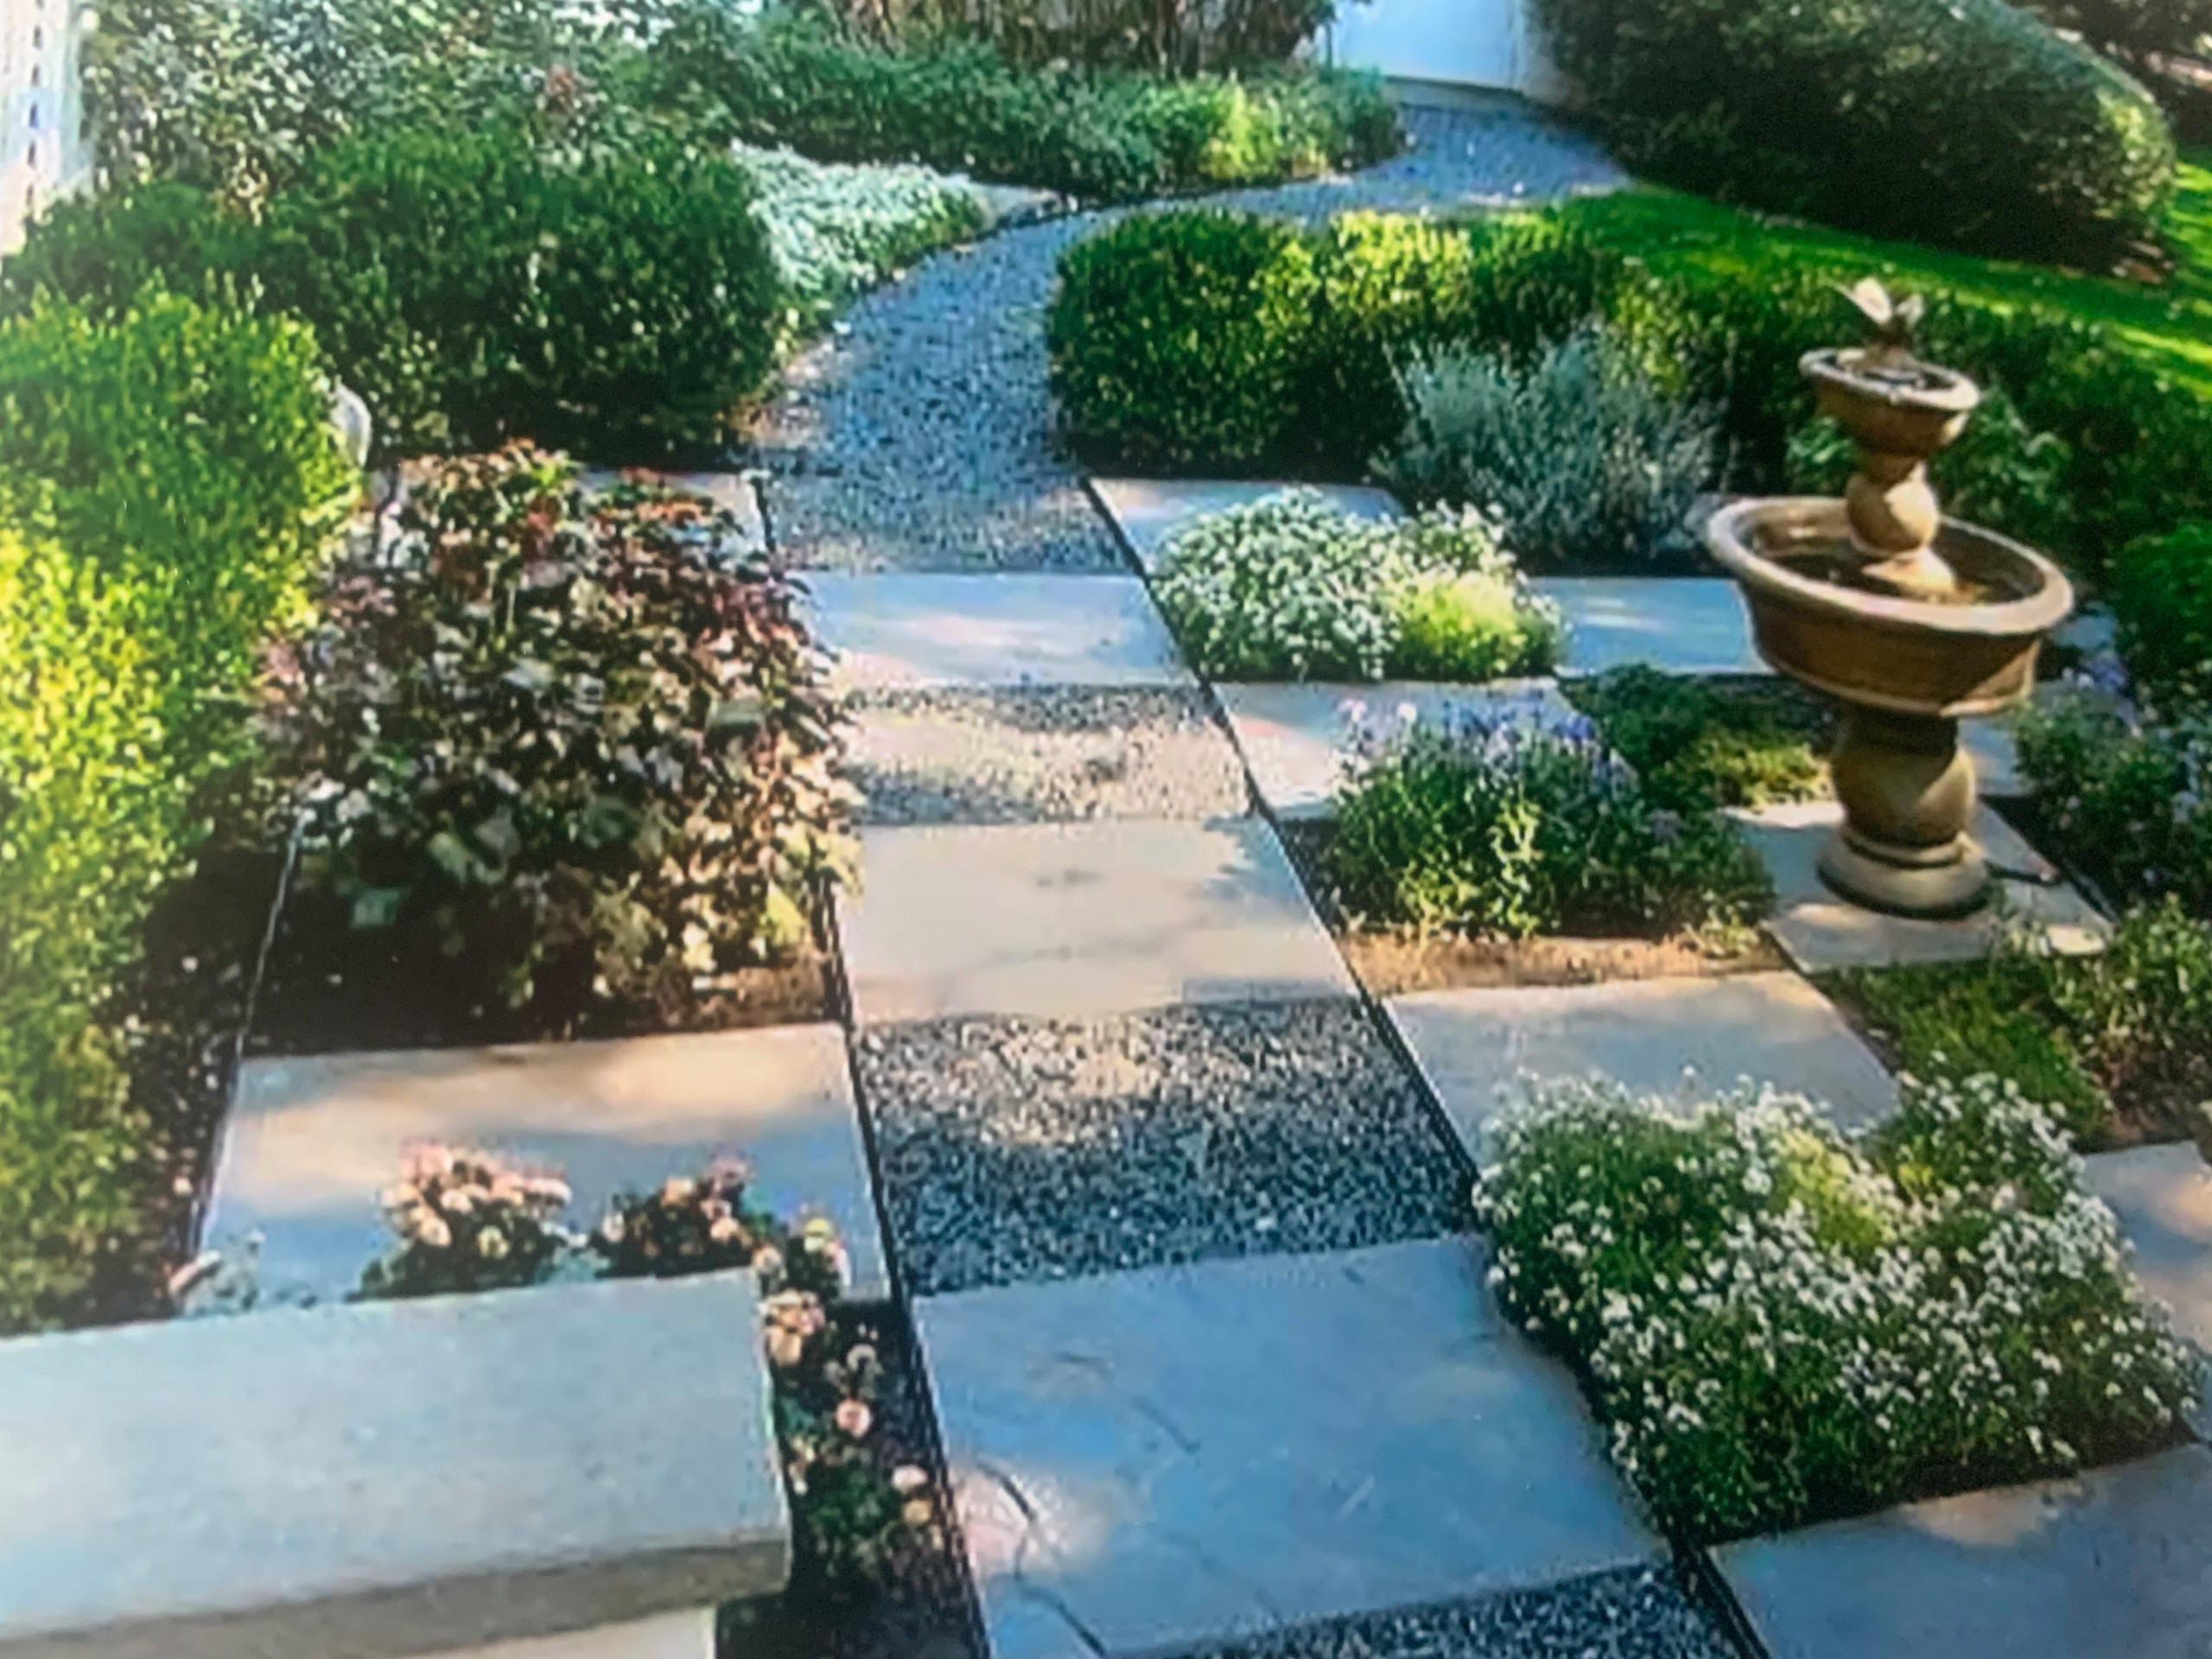 Planting Pockets within a patio setting by Peter Atkins and Associates